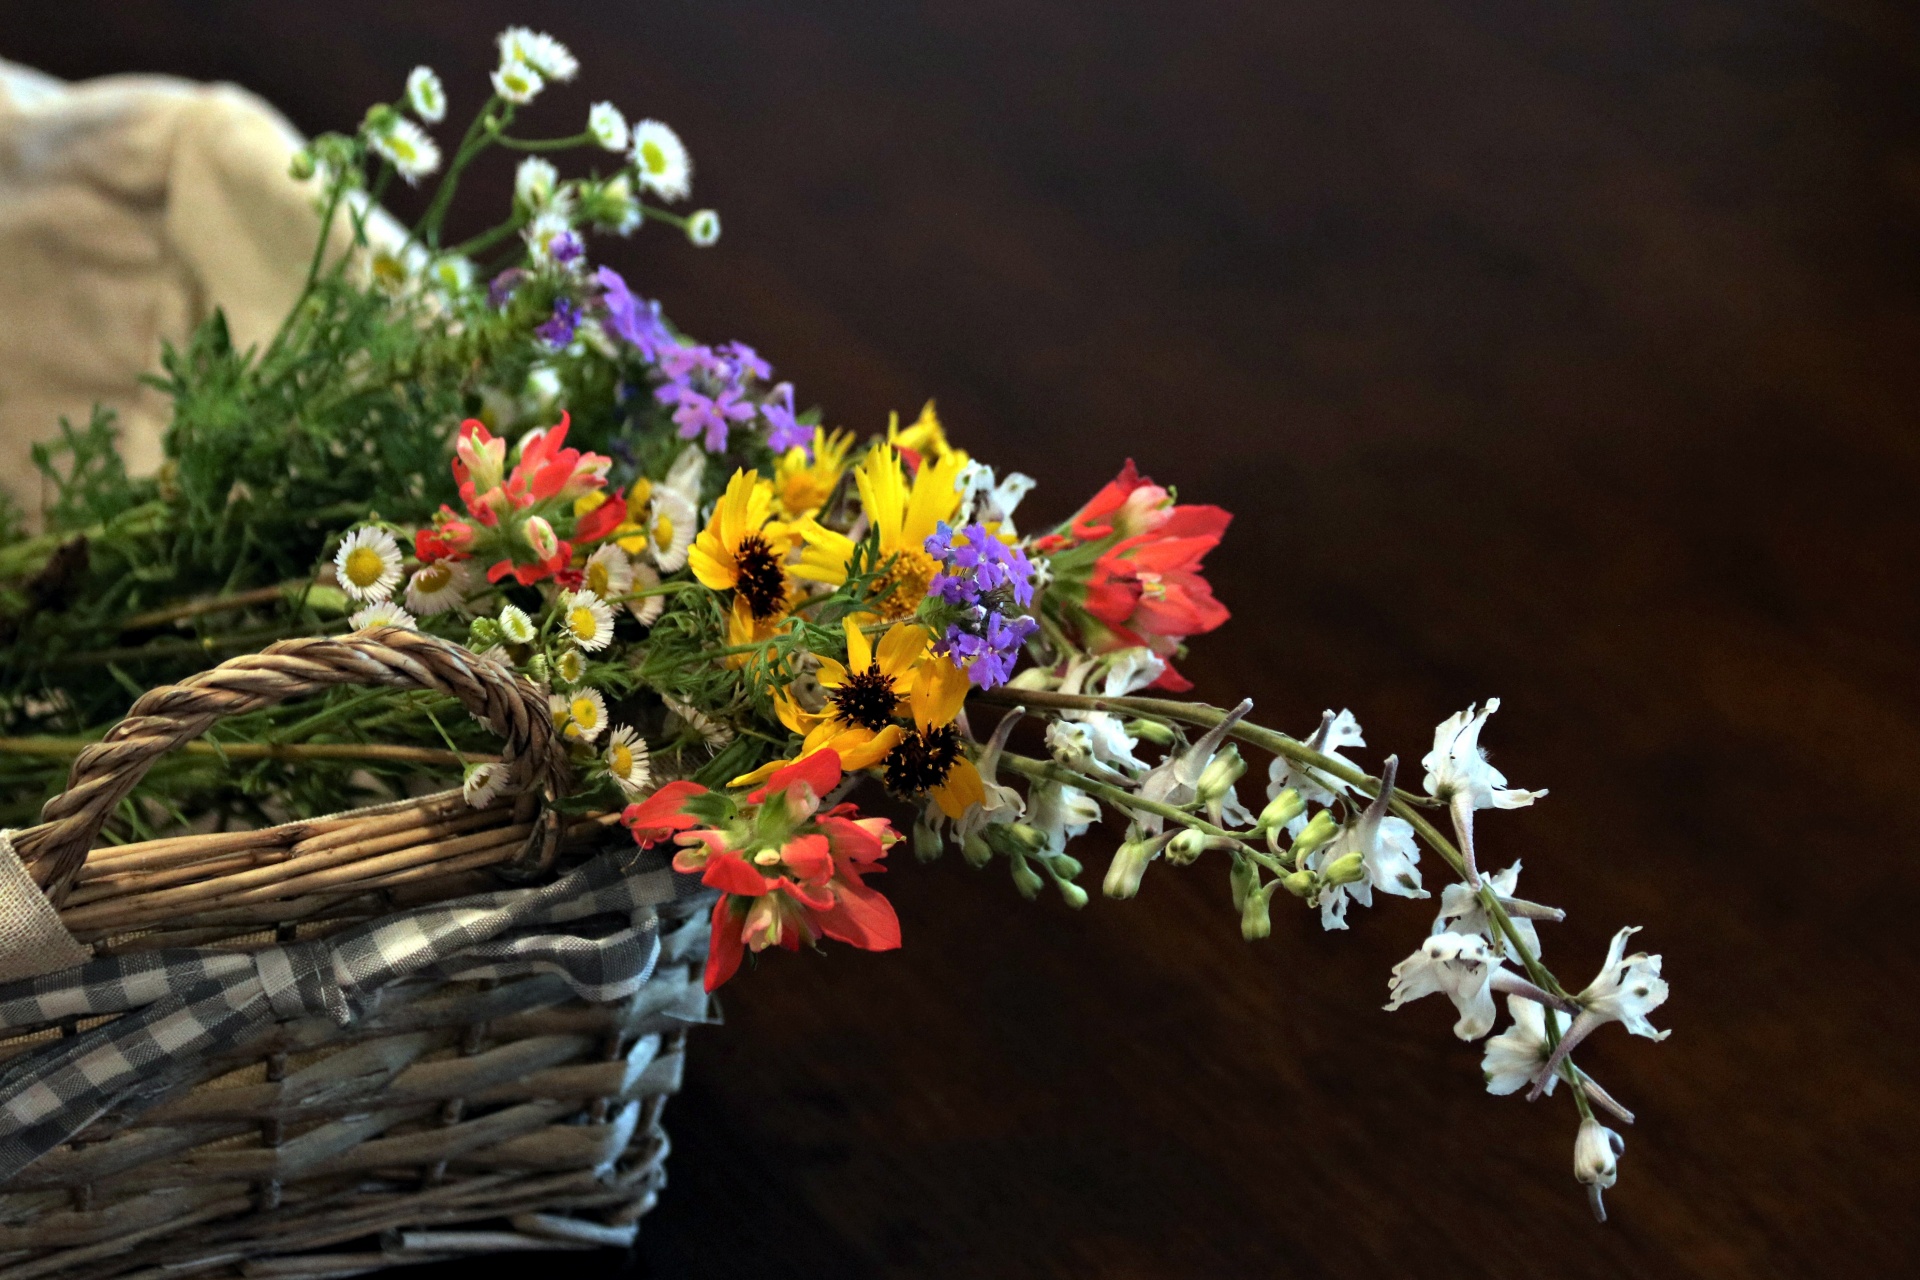 A variety of wildflowers in a wicker basket on a black background.